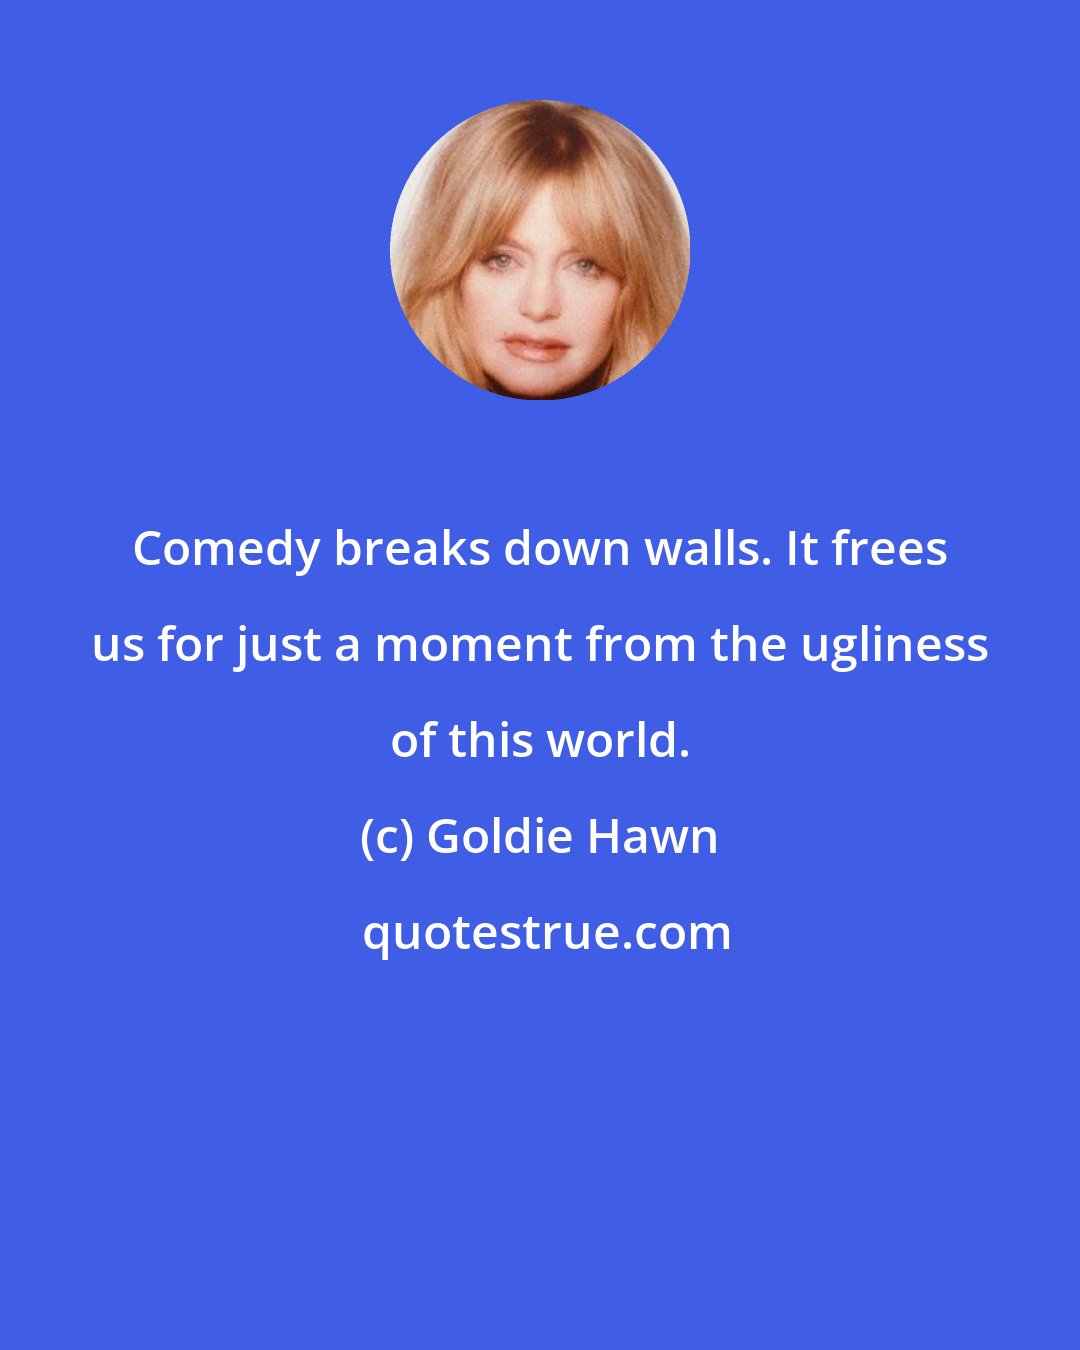 Goldie Hawn: Comedy breaks down walls. It frees us for just a moment from the ugliness of this world.